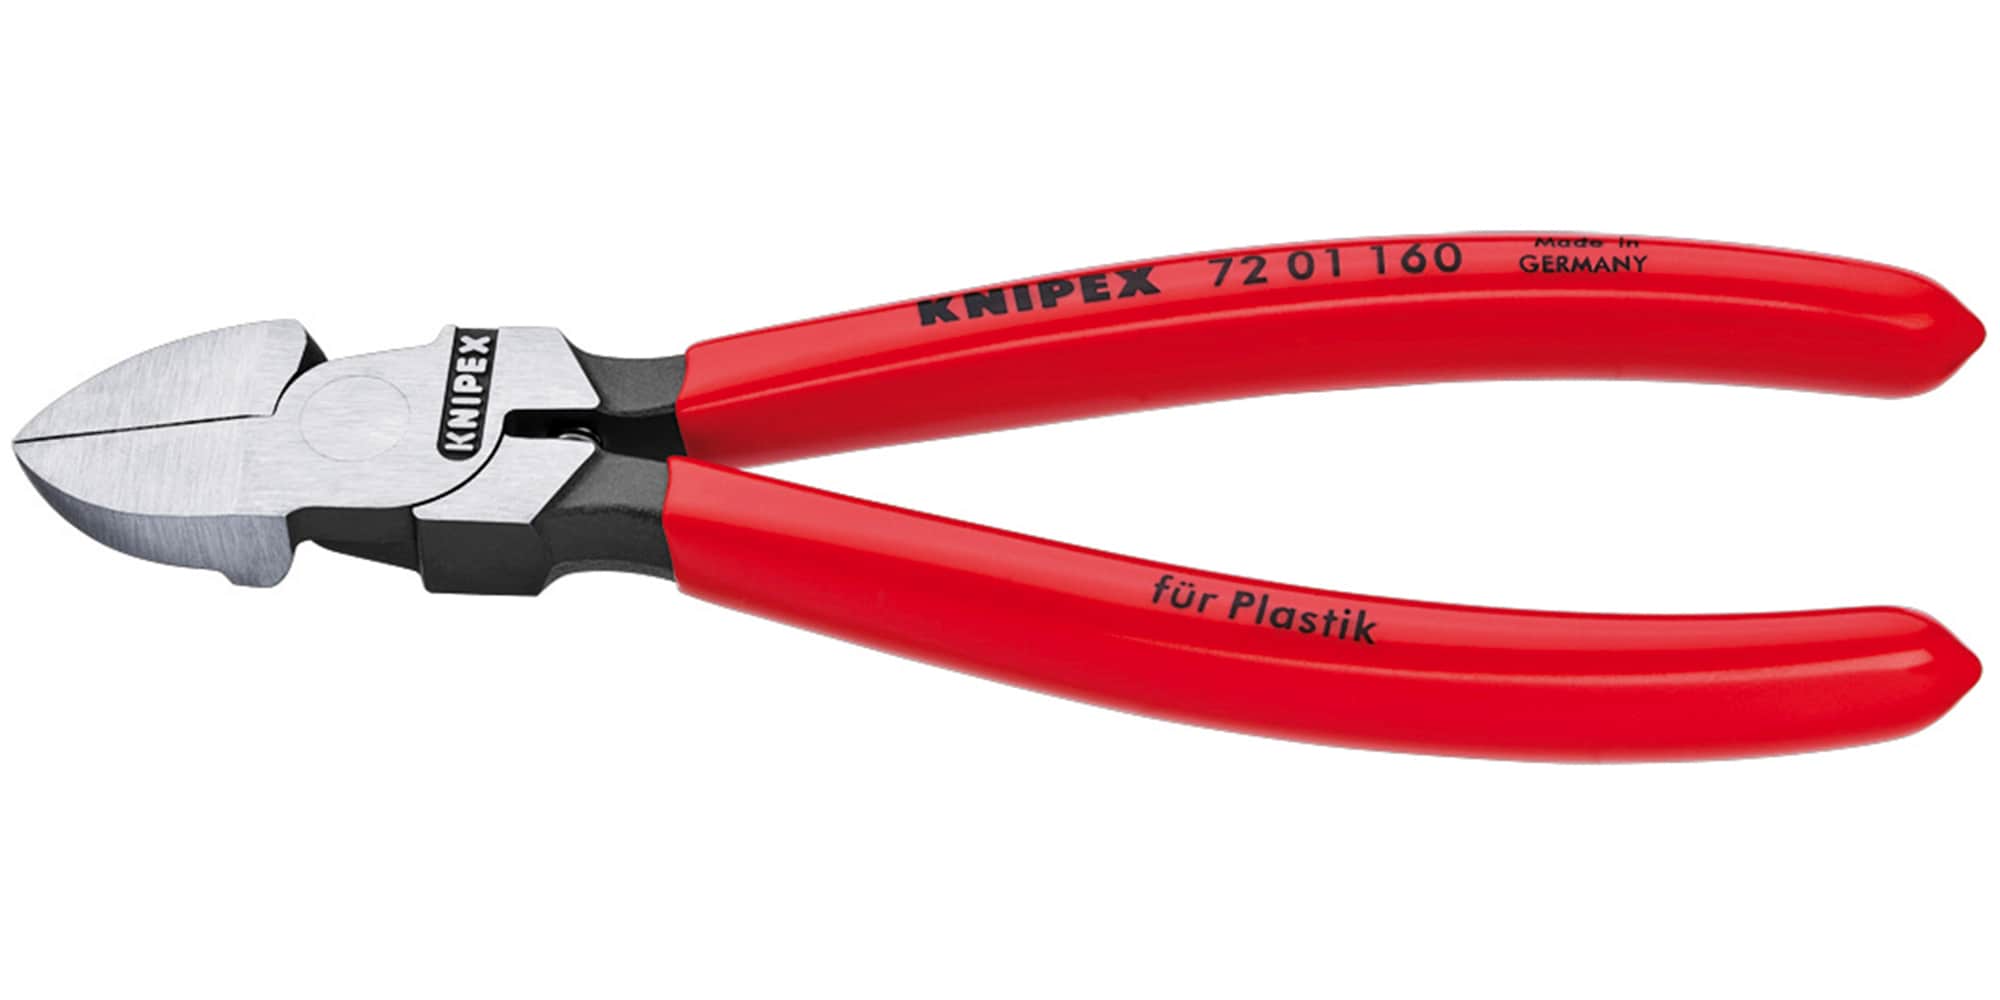 End Cutting Pliers Wire Cutter Cut Pliers 